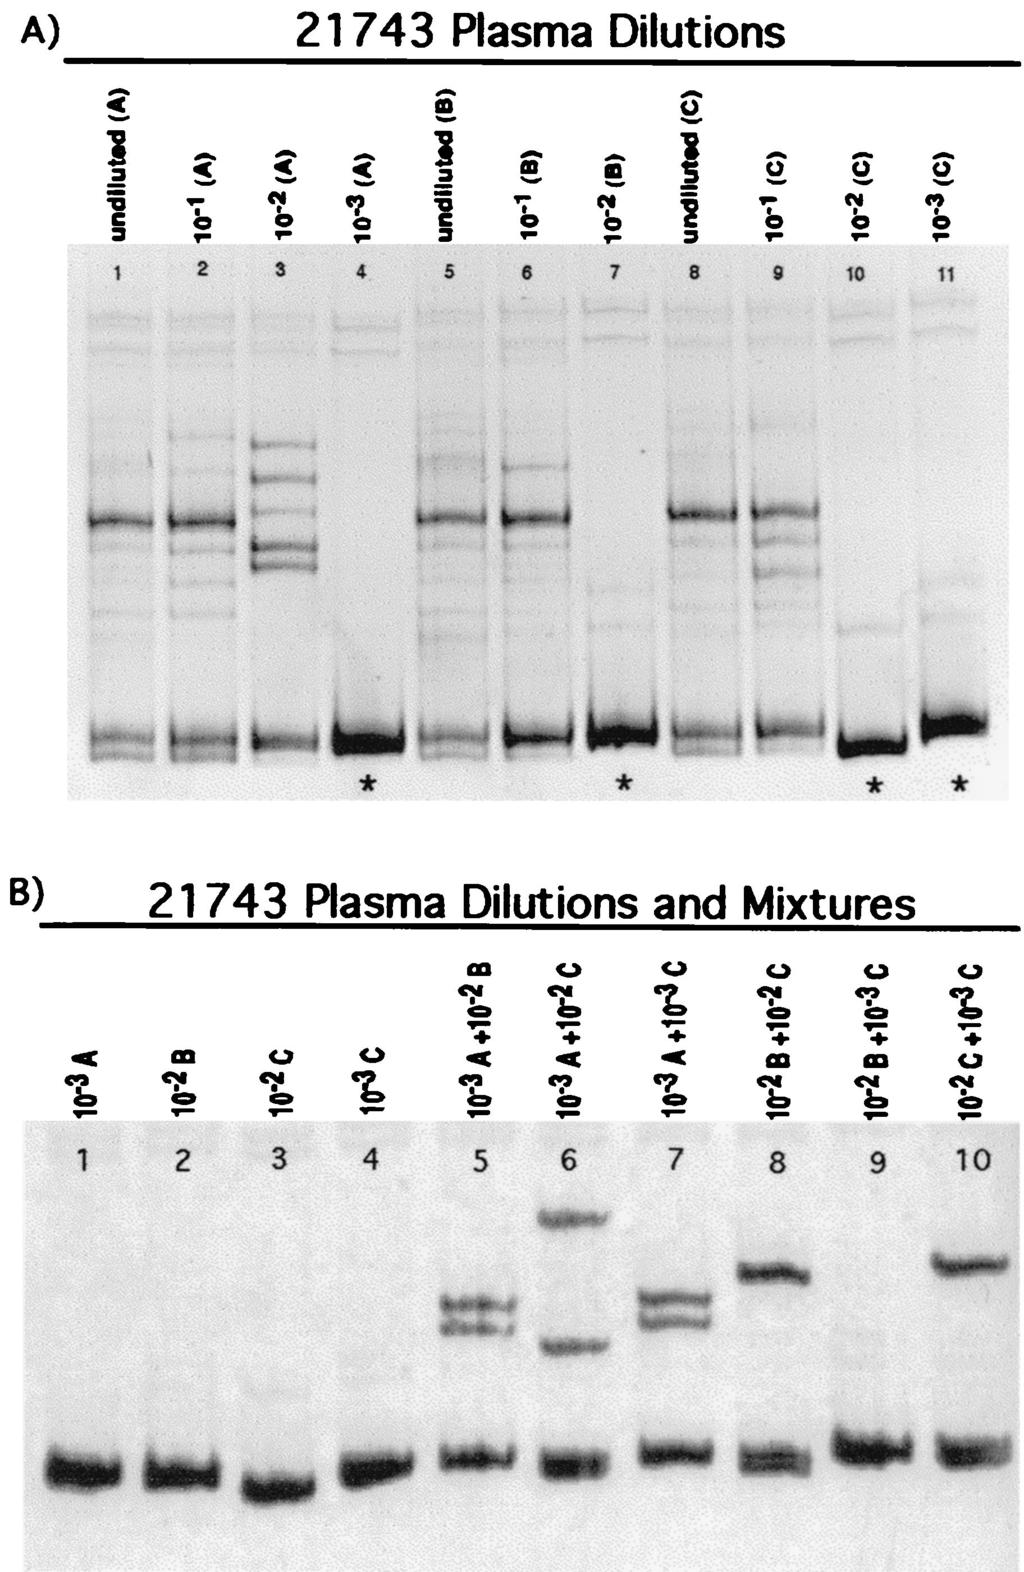 VOL. 75, 2001 TRANSMISSION OF SIV VARIANTS 3761 FIG. 10. SIV V1-V2 variants present in dilution series B (Fig. 9) of plasma from donor monkey 21743 at 2 weeks p.i. Lanes 1 to 3, dilutions of plasma from undiluted to 10 2 (same as lanes 5 to 7 in Fig.